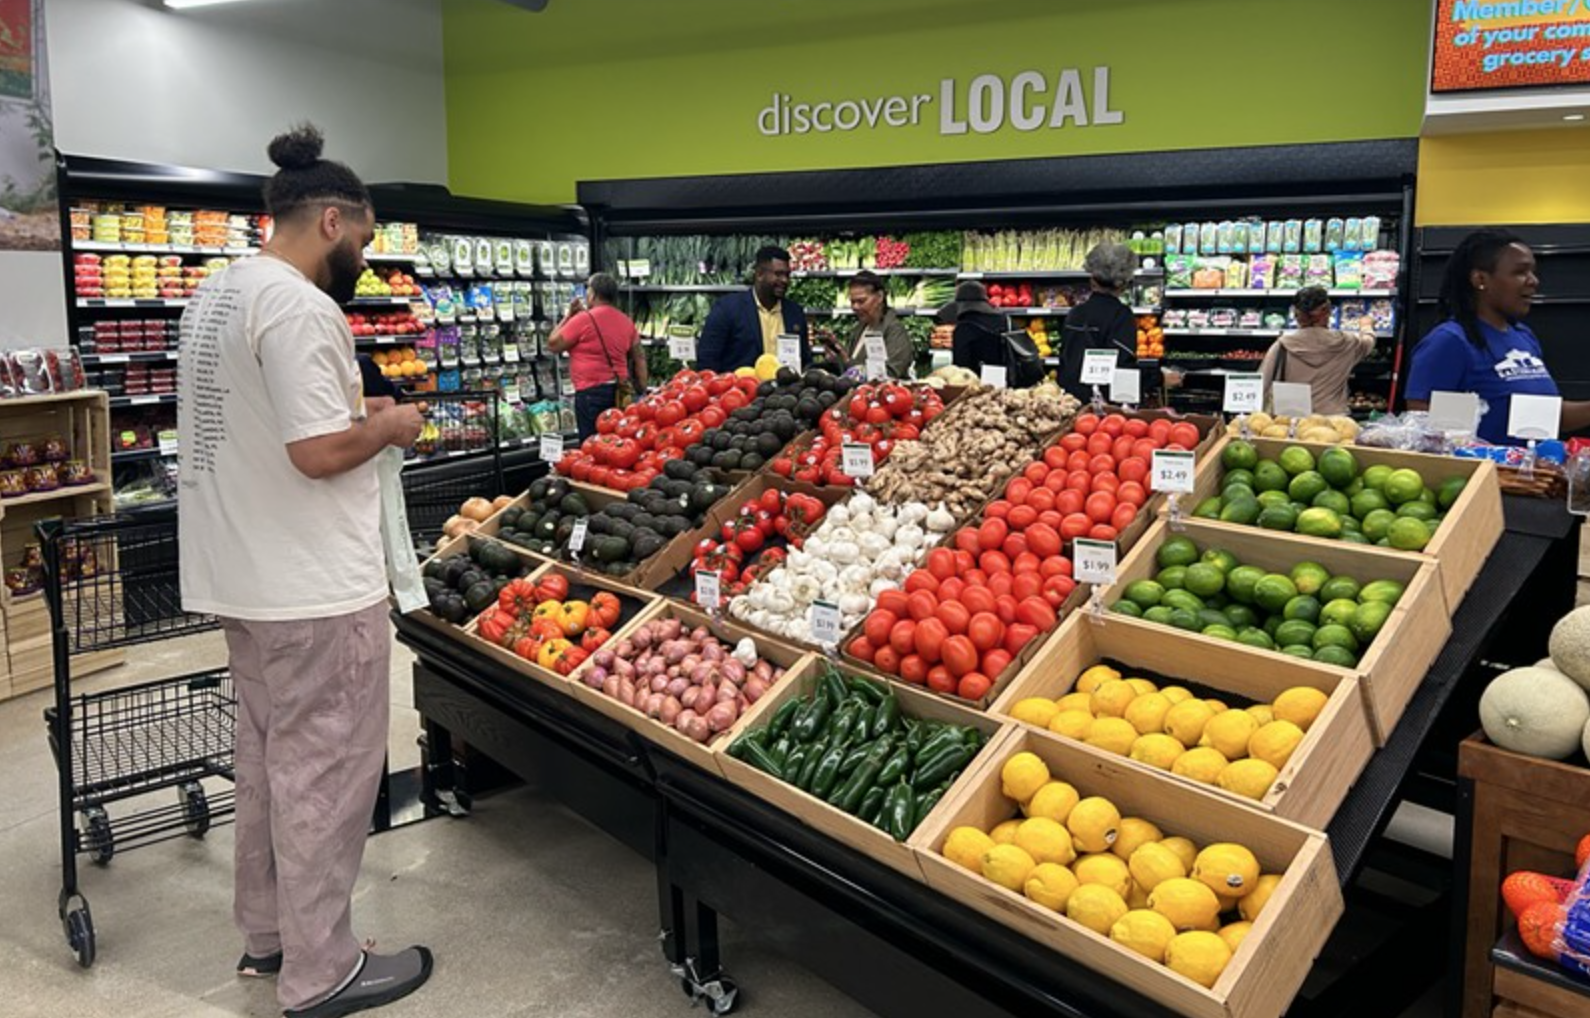 Detroit’s First Black-Run And Community-Operated Grocery Store, Detroit People’s Food Co-Op, Opens Its Doors